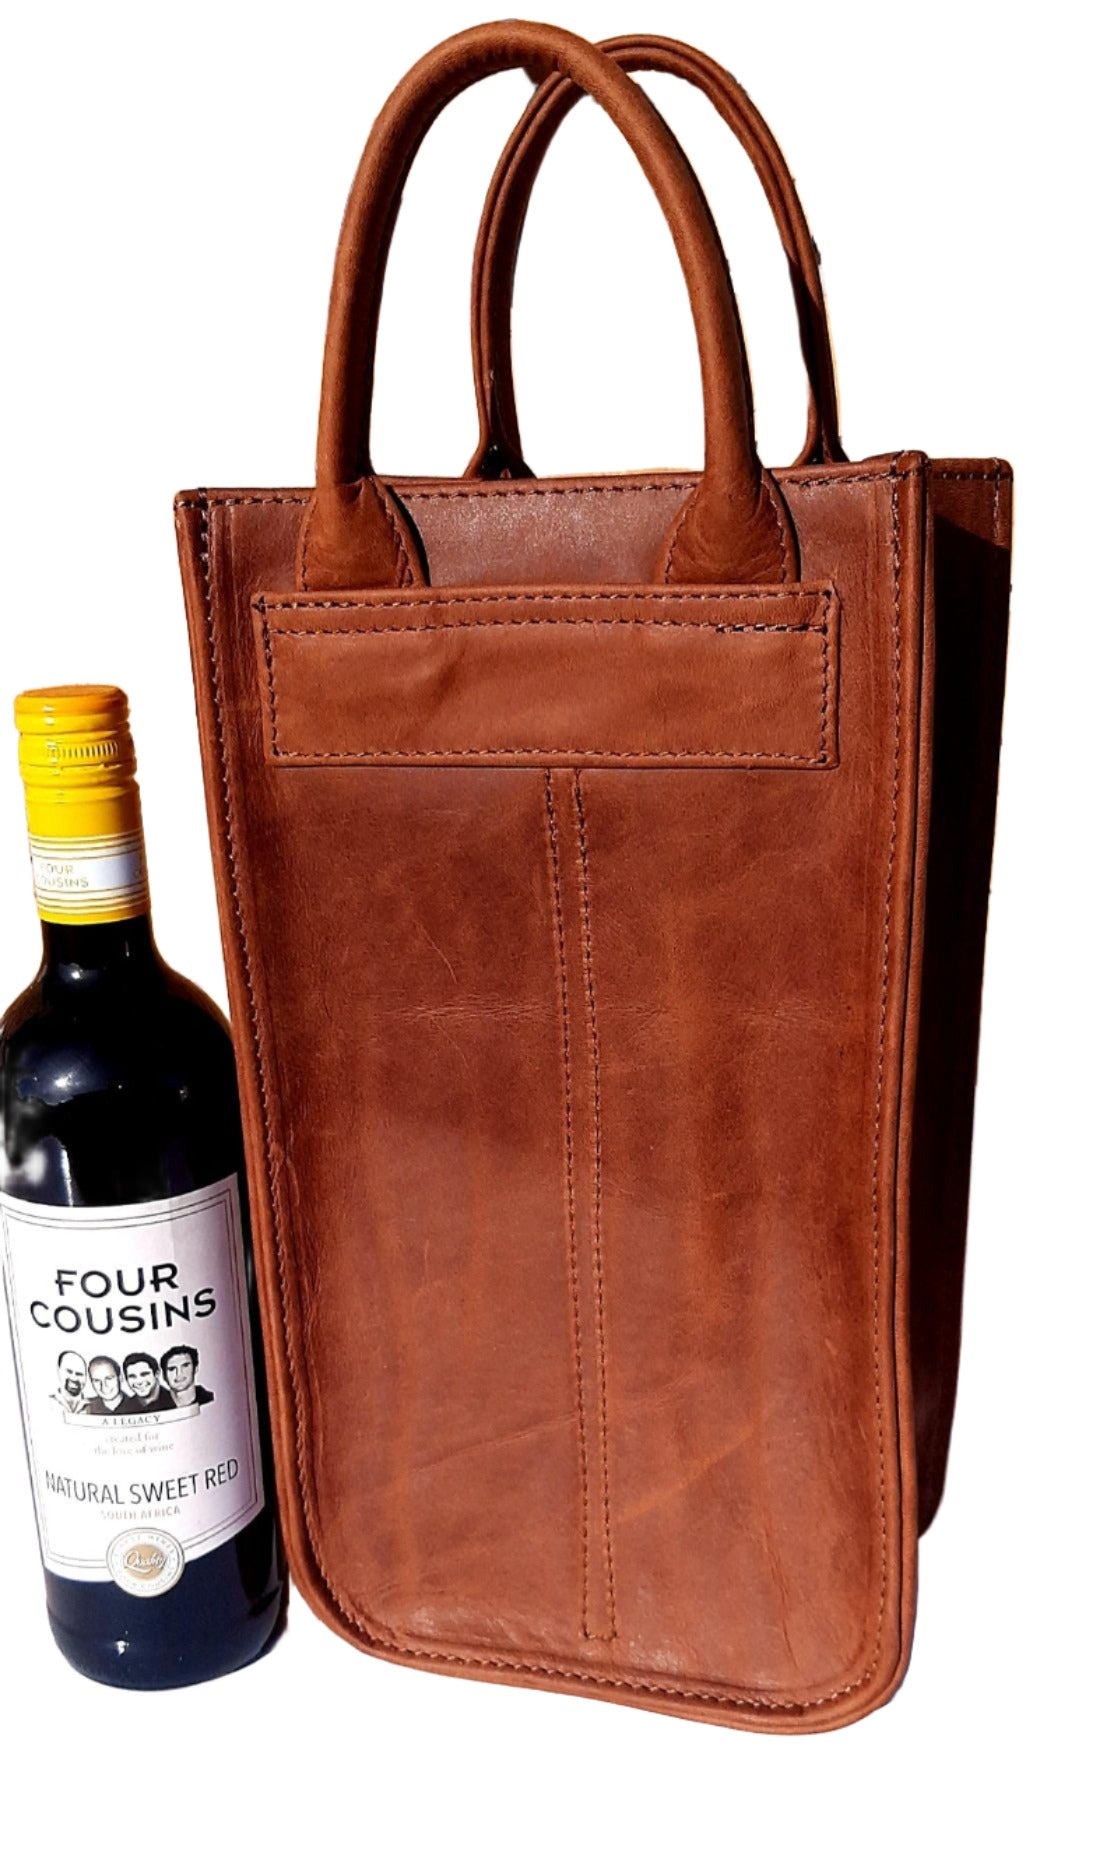 Cape wine bags by Cape Masai Leather pitstop cigar